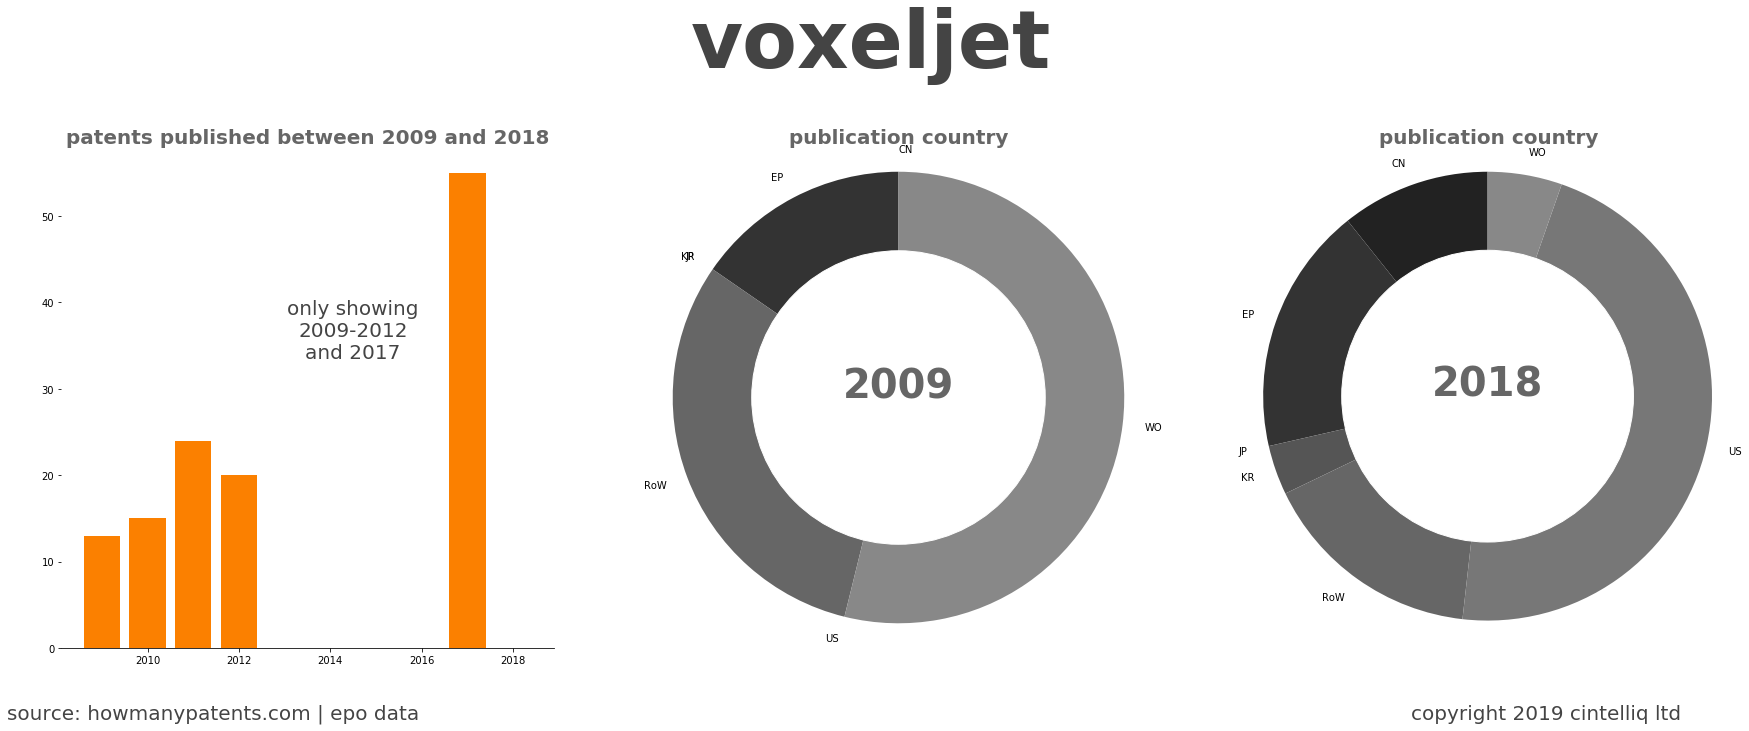 summary of patents for Voxeljet